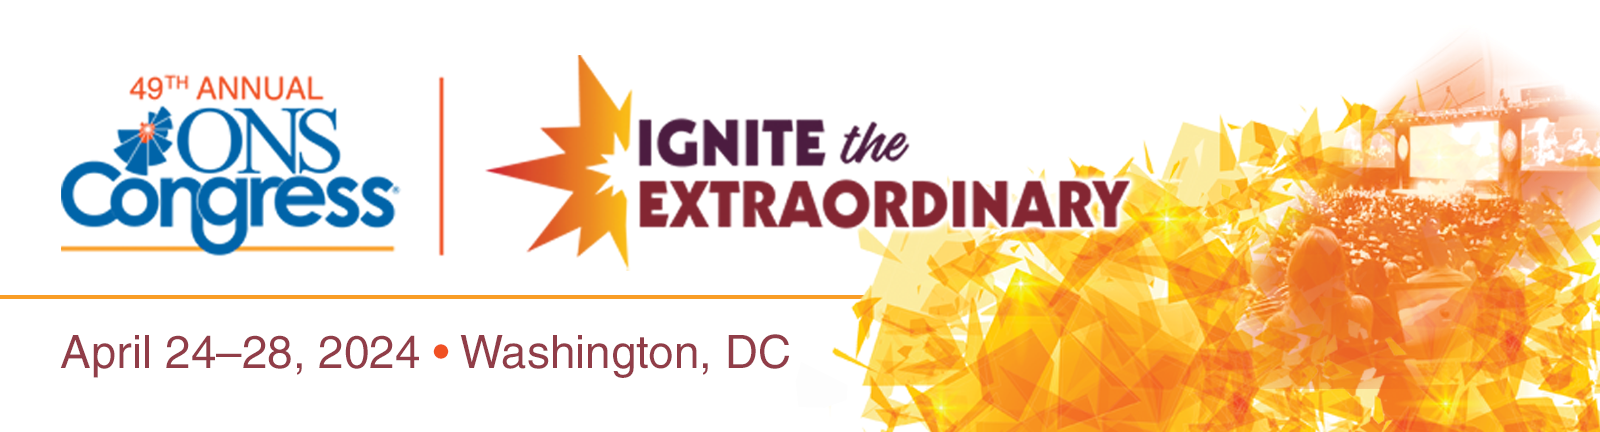 Washington, DC Welcomes the 49th Annual ONS Congress®